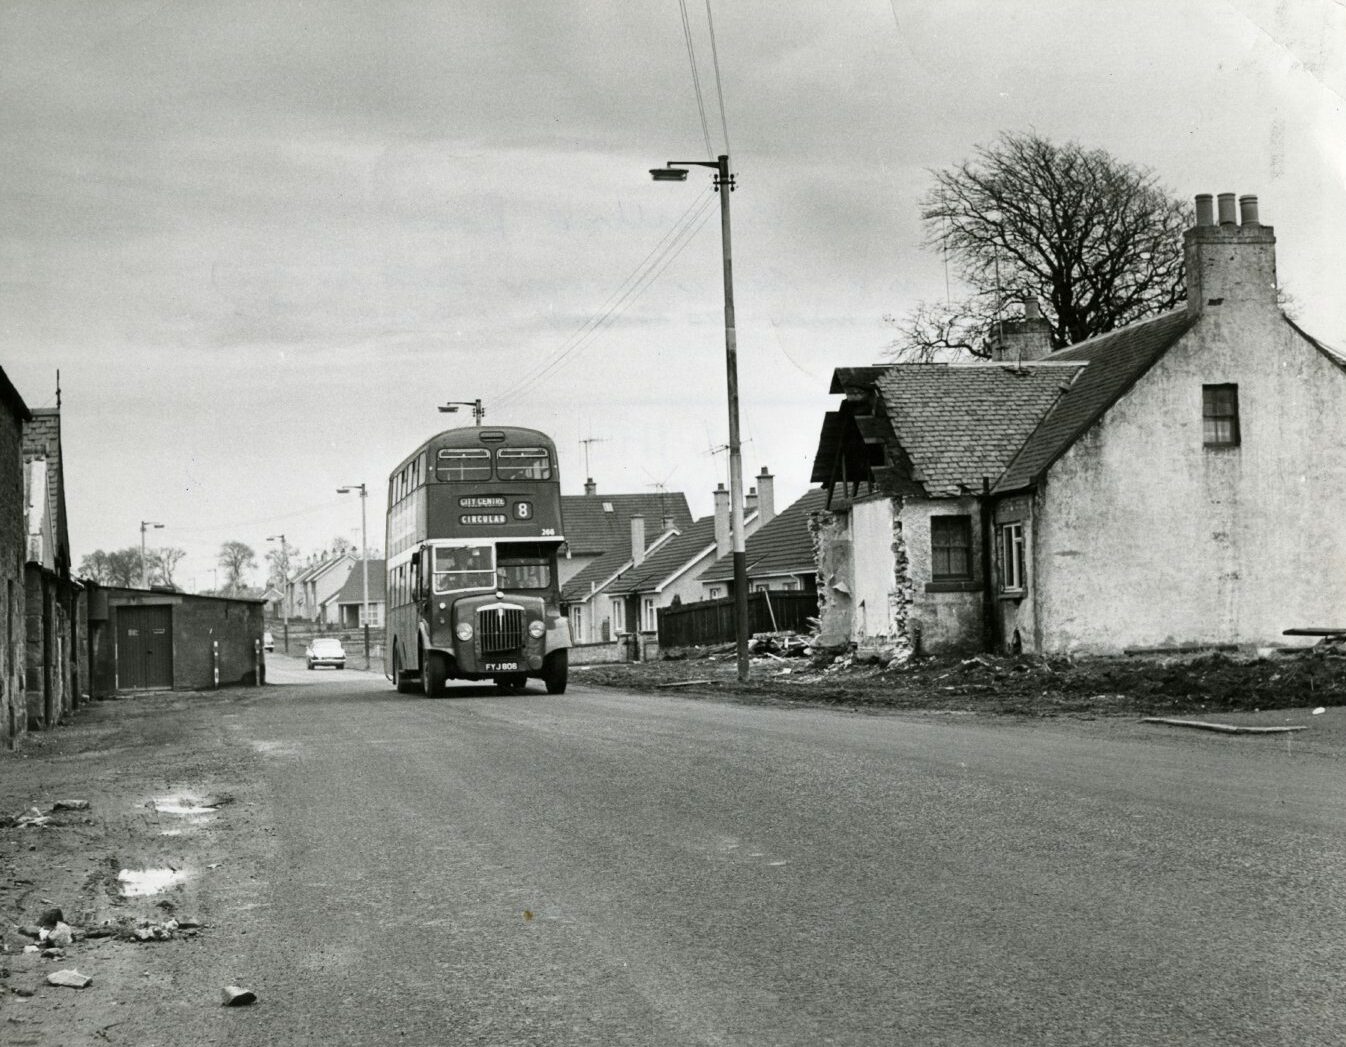 A bus travels along Balgillo Road in Broughty Ferry in 1965.